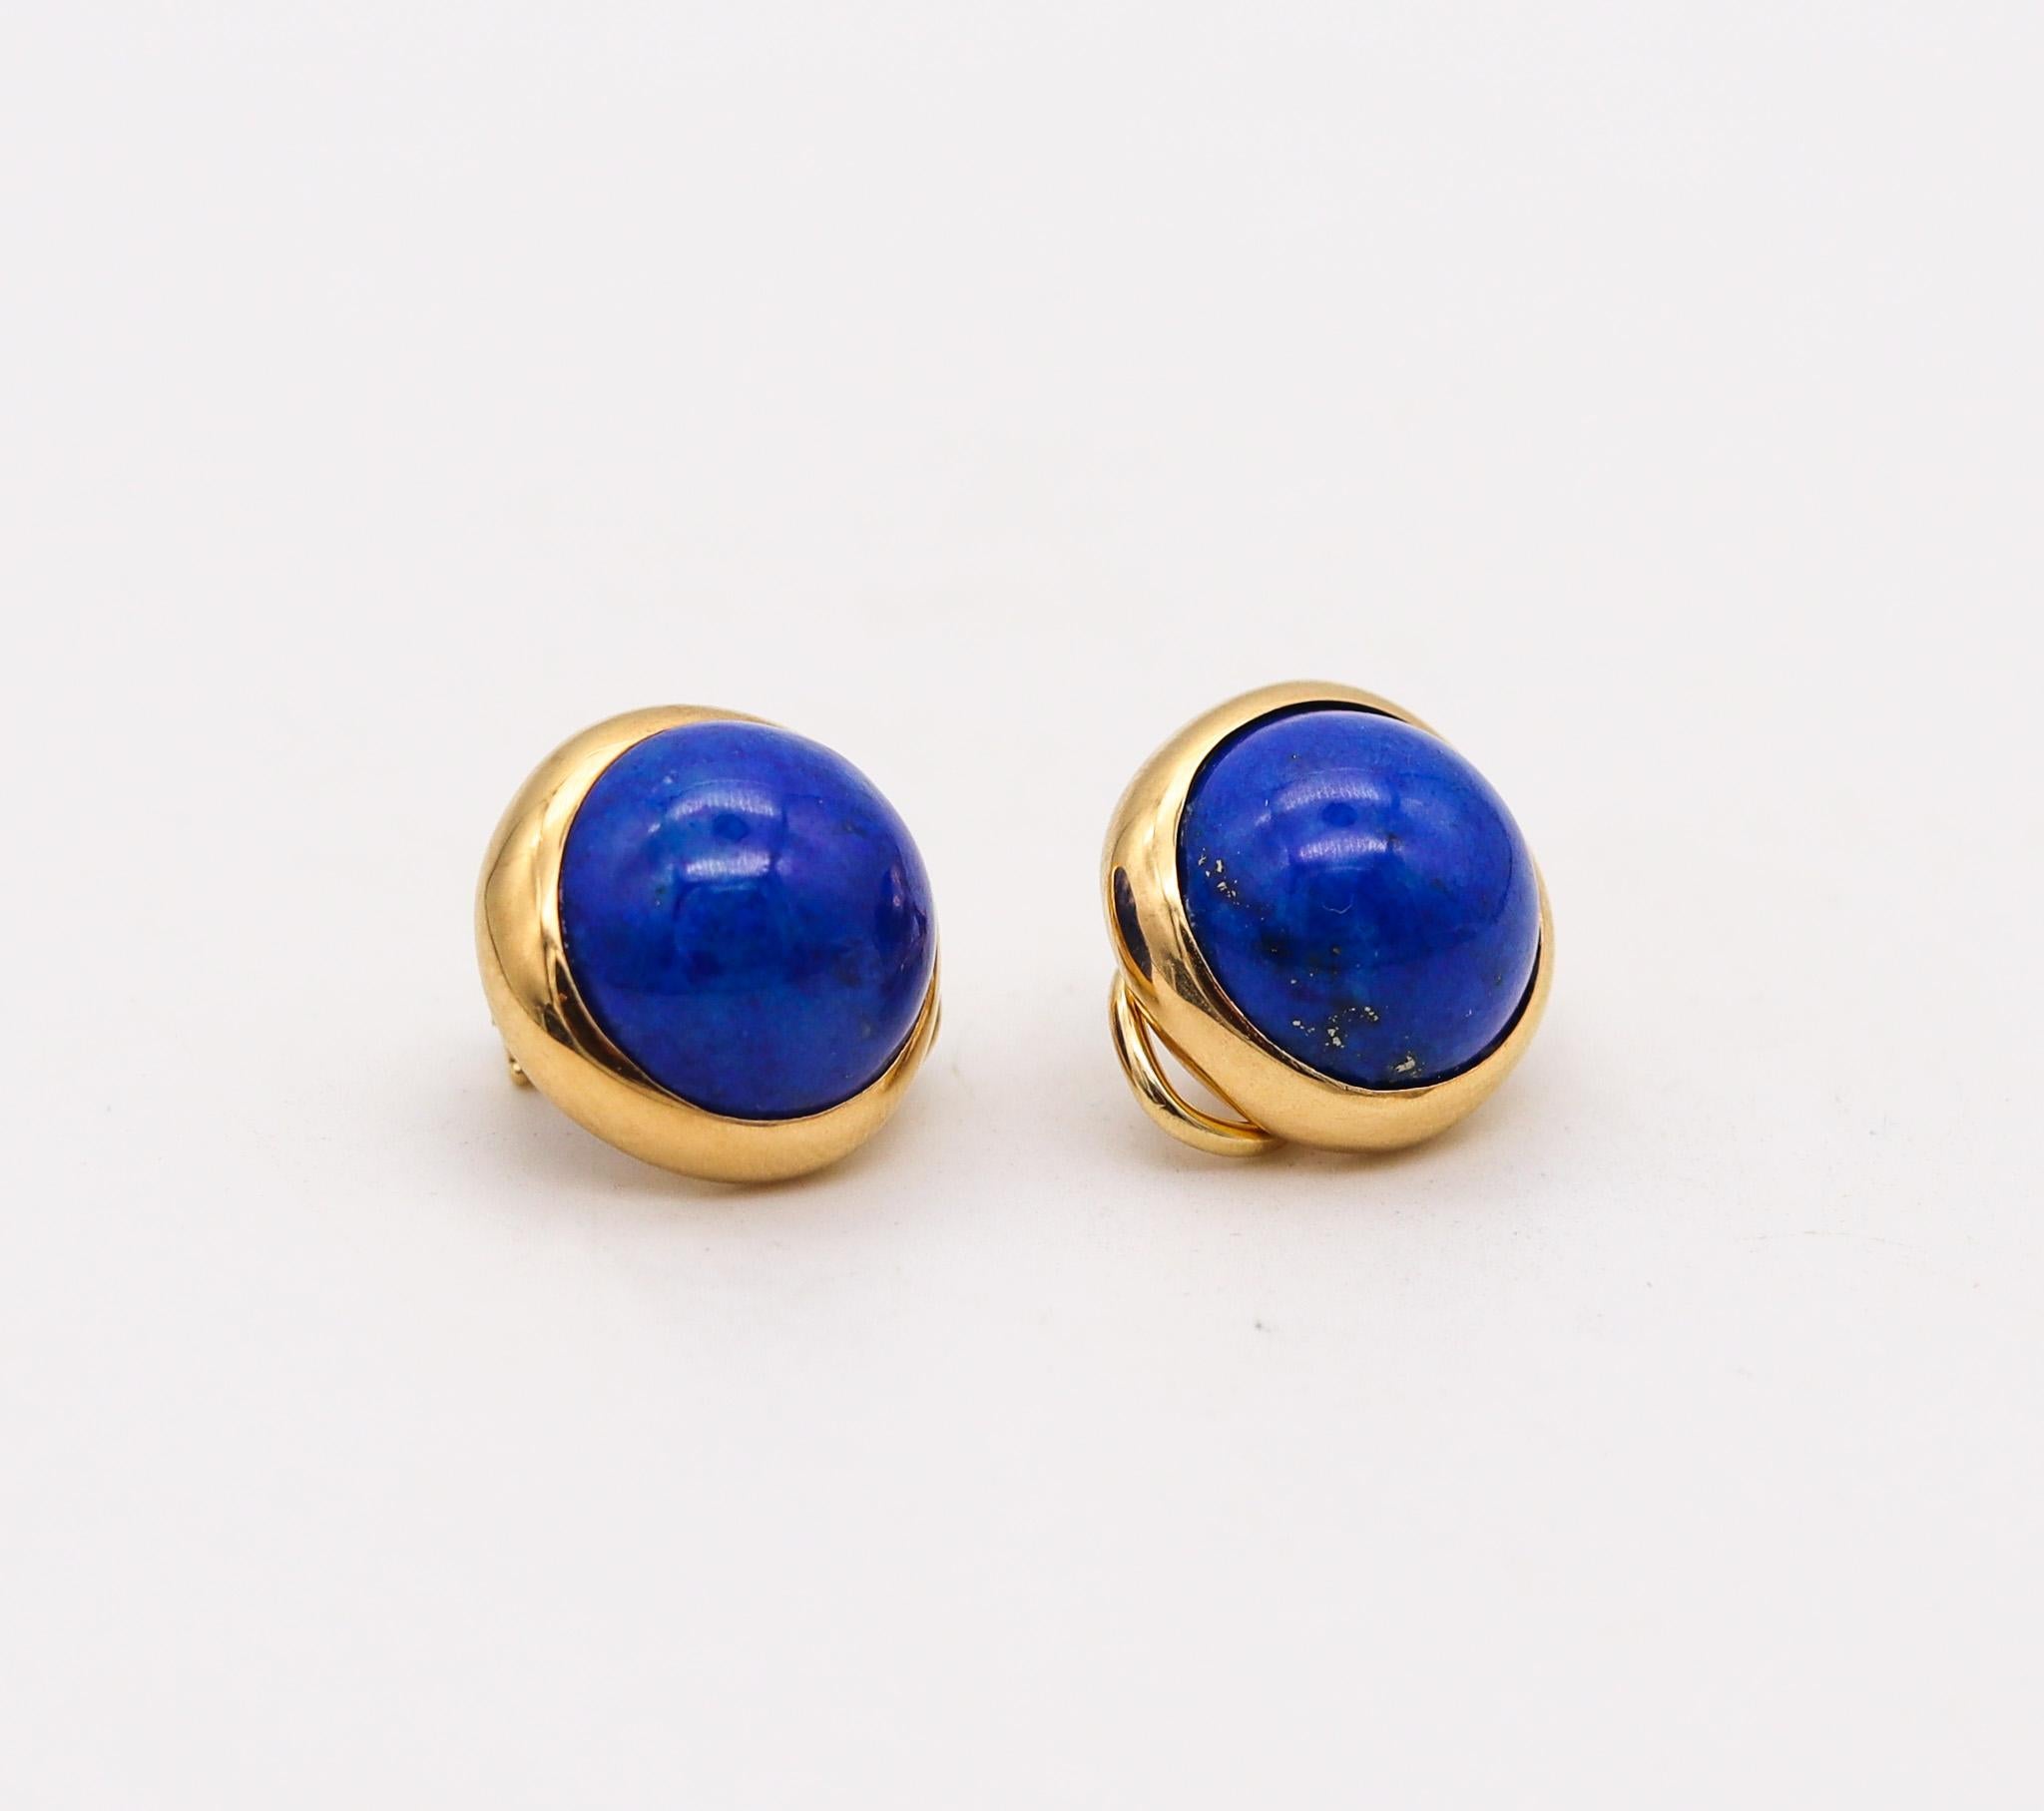 Cabochon Tiffany & Co. 1980 Peretti Clips on Earrings in 18 Karat Gold with Lapis Lazuli